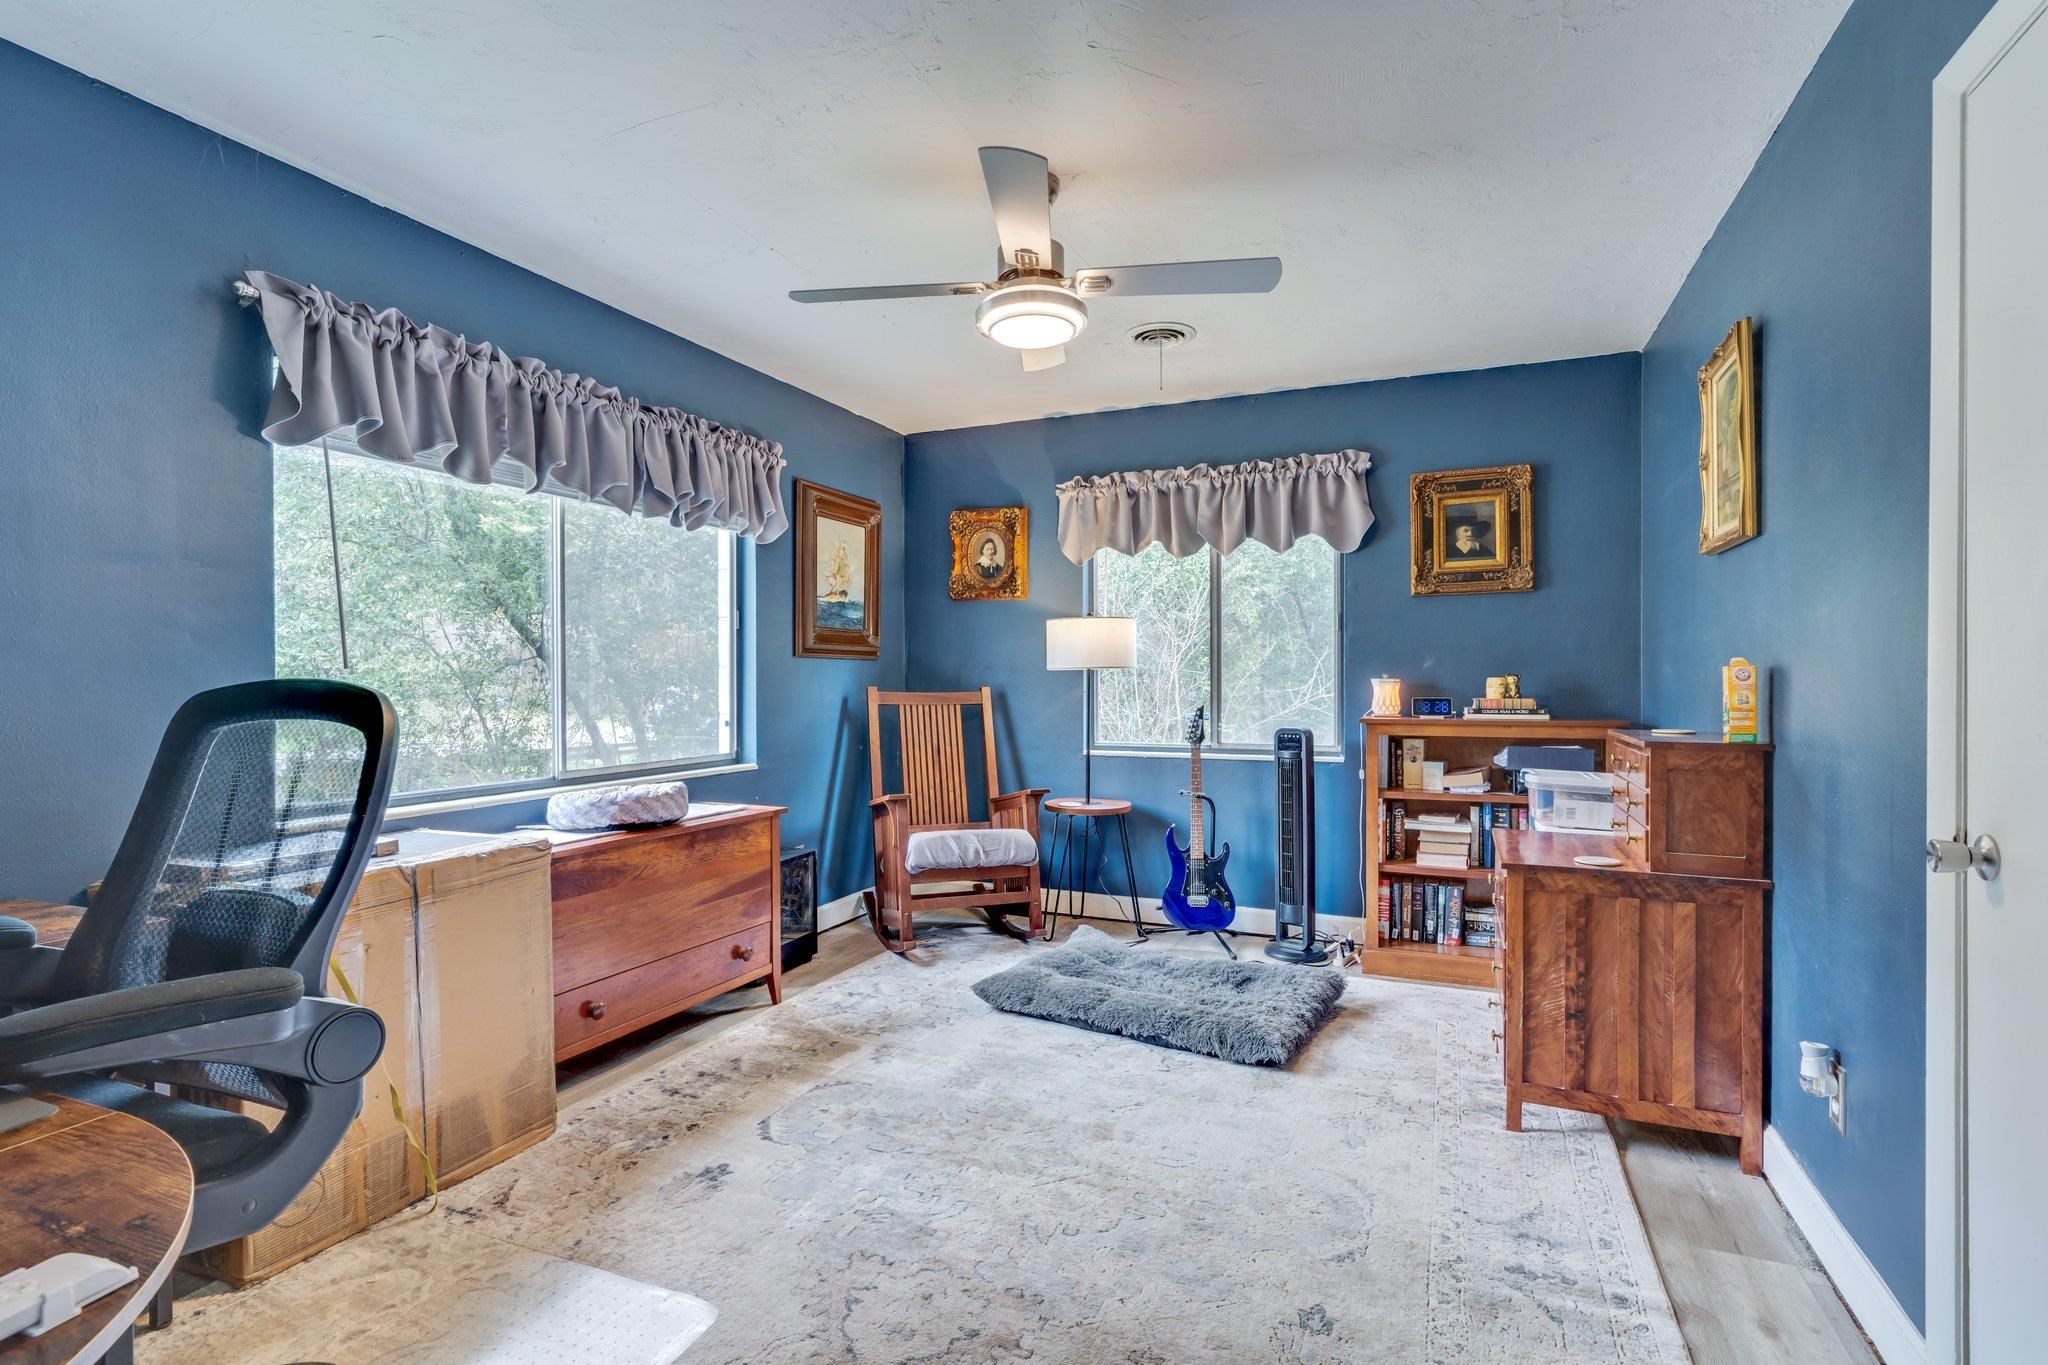 4865 Jackson Cove Road,TALLAHASSEE,Florida 32303,2 Bedrooms Bedrooms,1 BathroomBathrooms,Detached single family,4865 Jackson Cove Road,369172